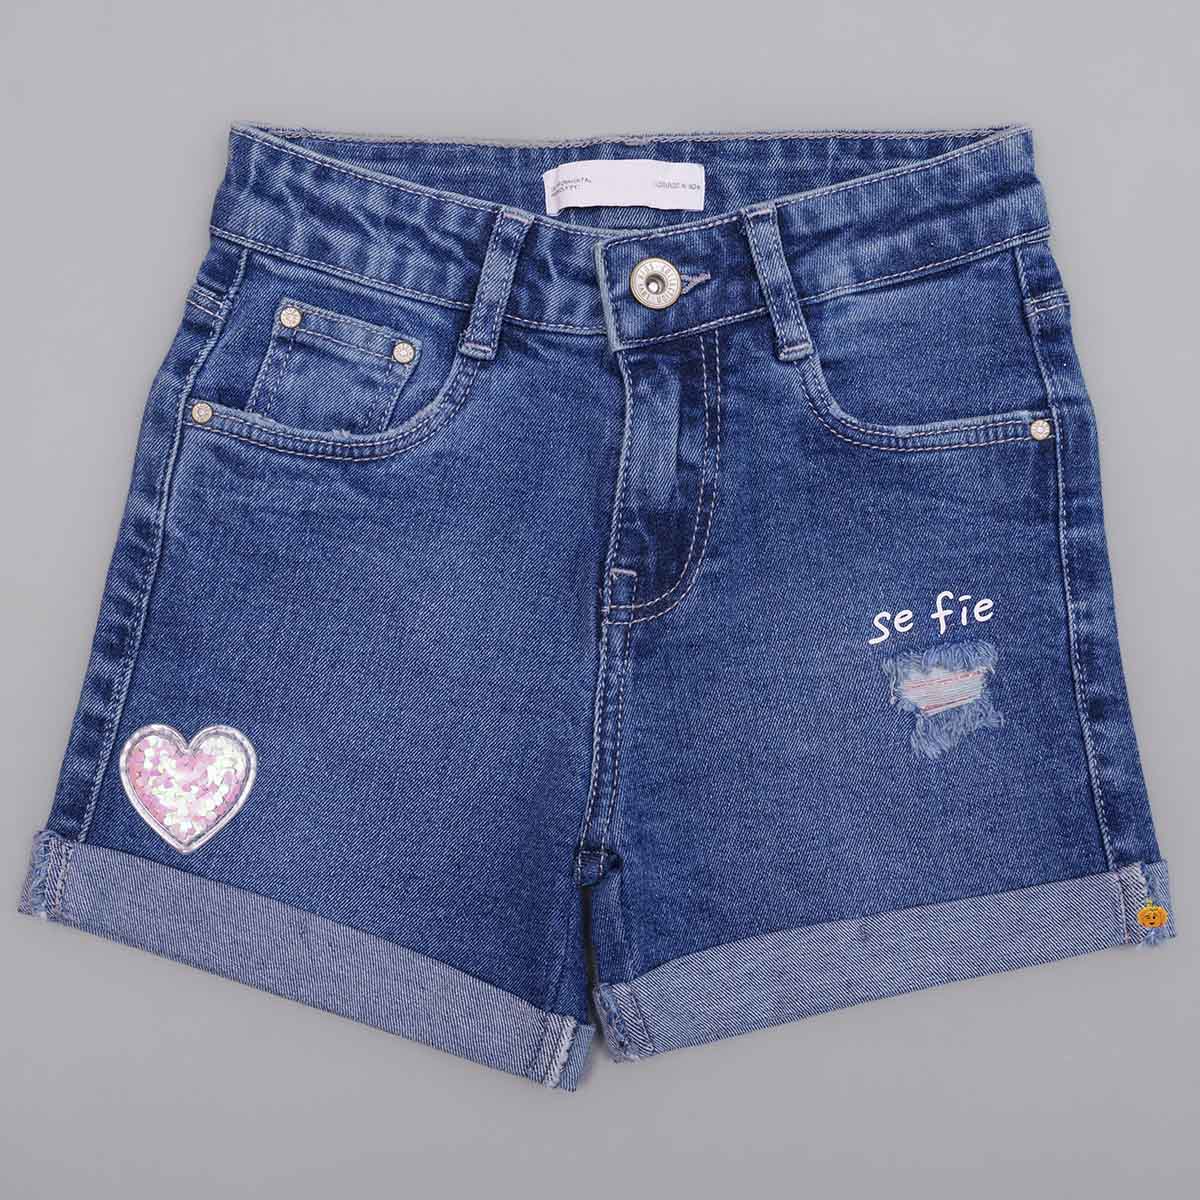 ZCFZJW Toddler Baby Girls Casual Denim Shorts Middle School Students Summer  High Waisted Thin Elastic Waistband Jeans Short Pants #01-Blue 6-7 Years -  Walmart.com